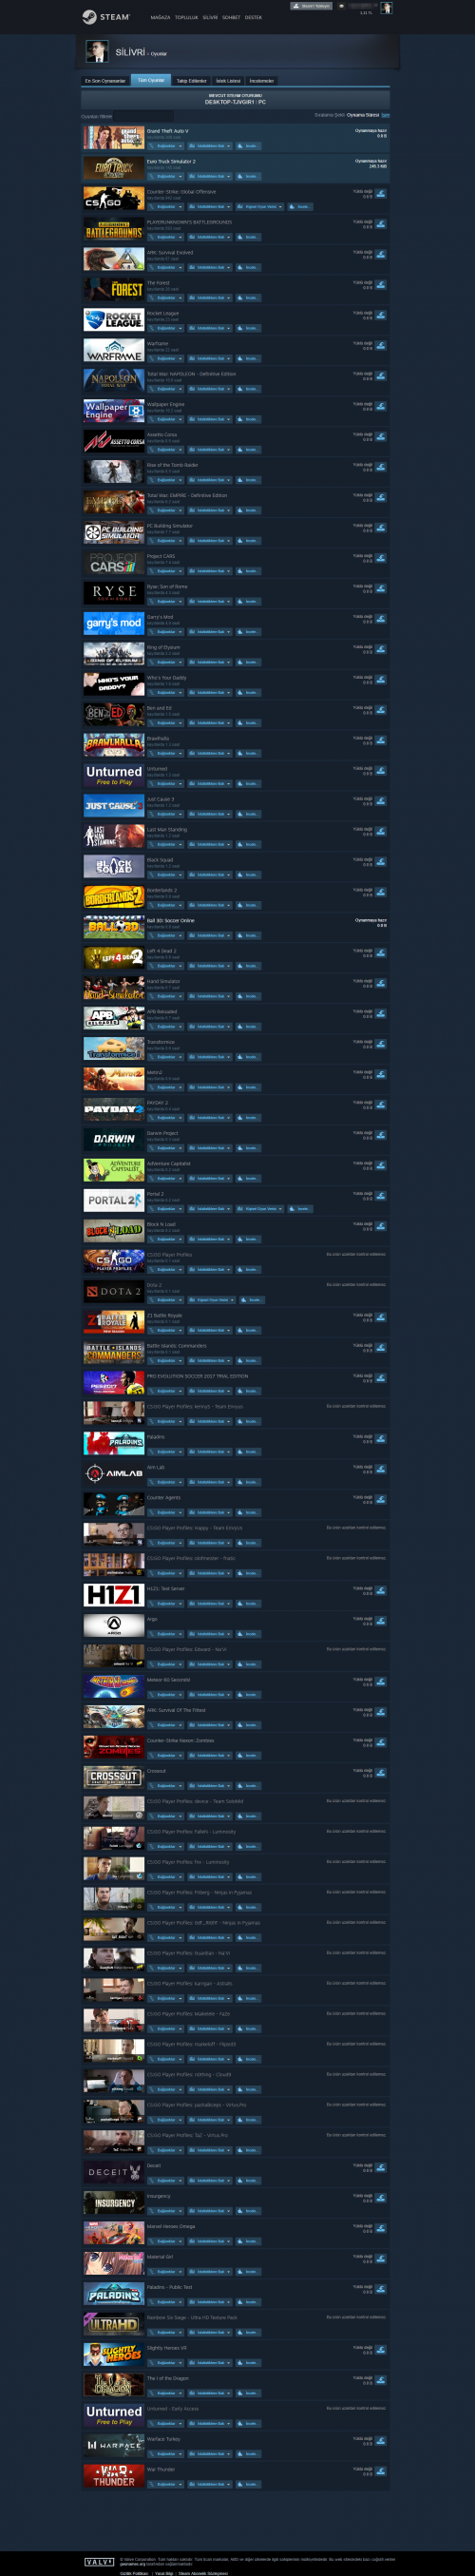 screencapture-steamcommunity-id-dolarssQW-games-2019-04-10-20_08_43.png